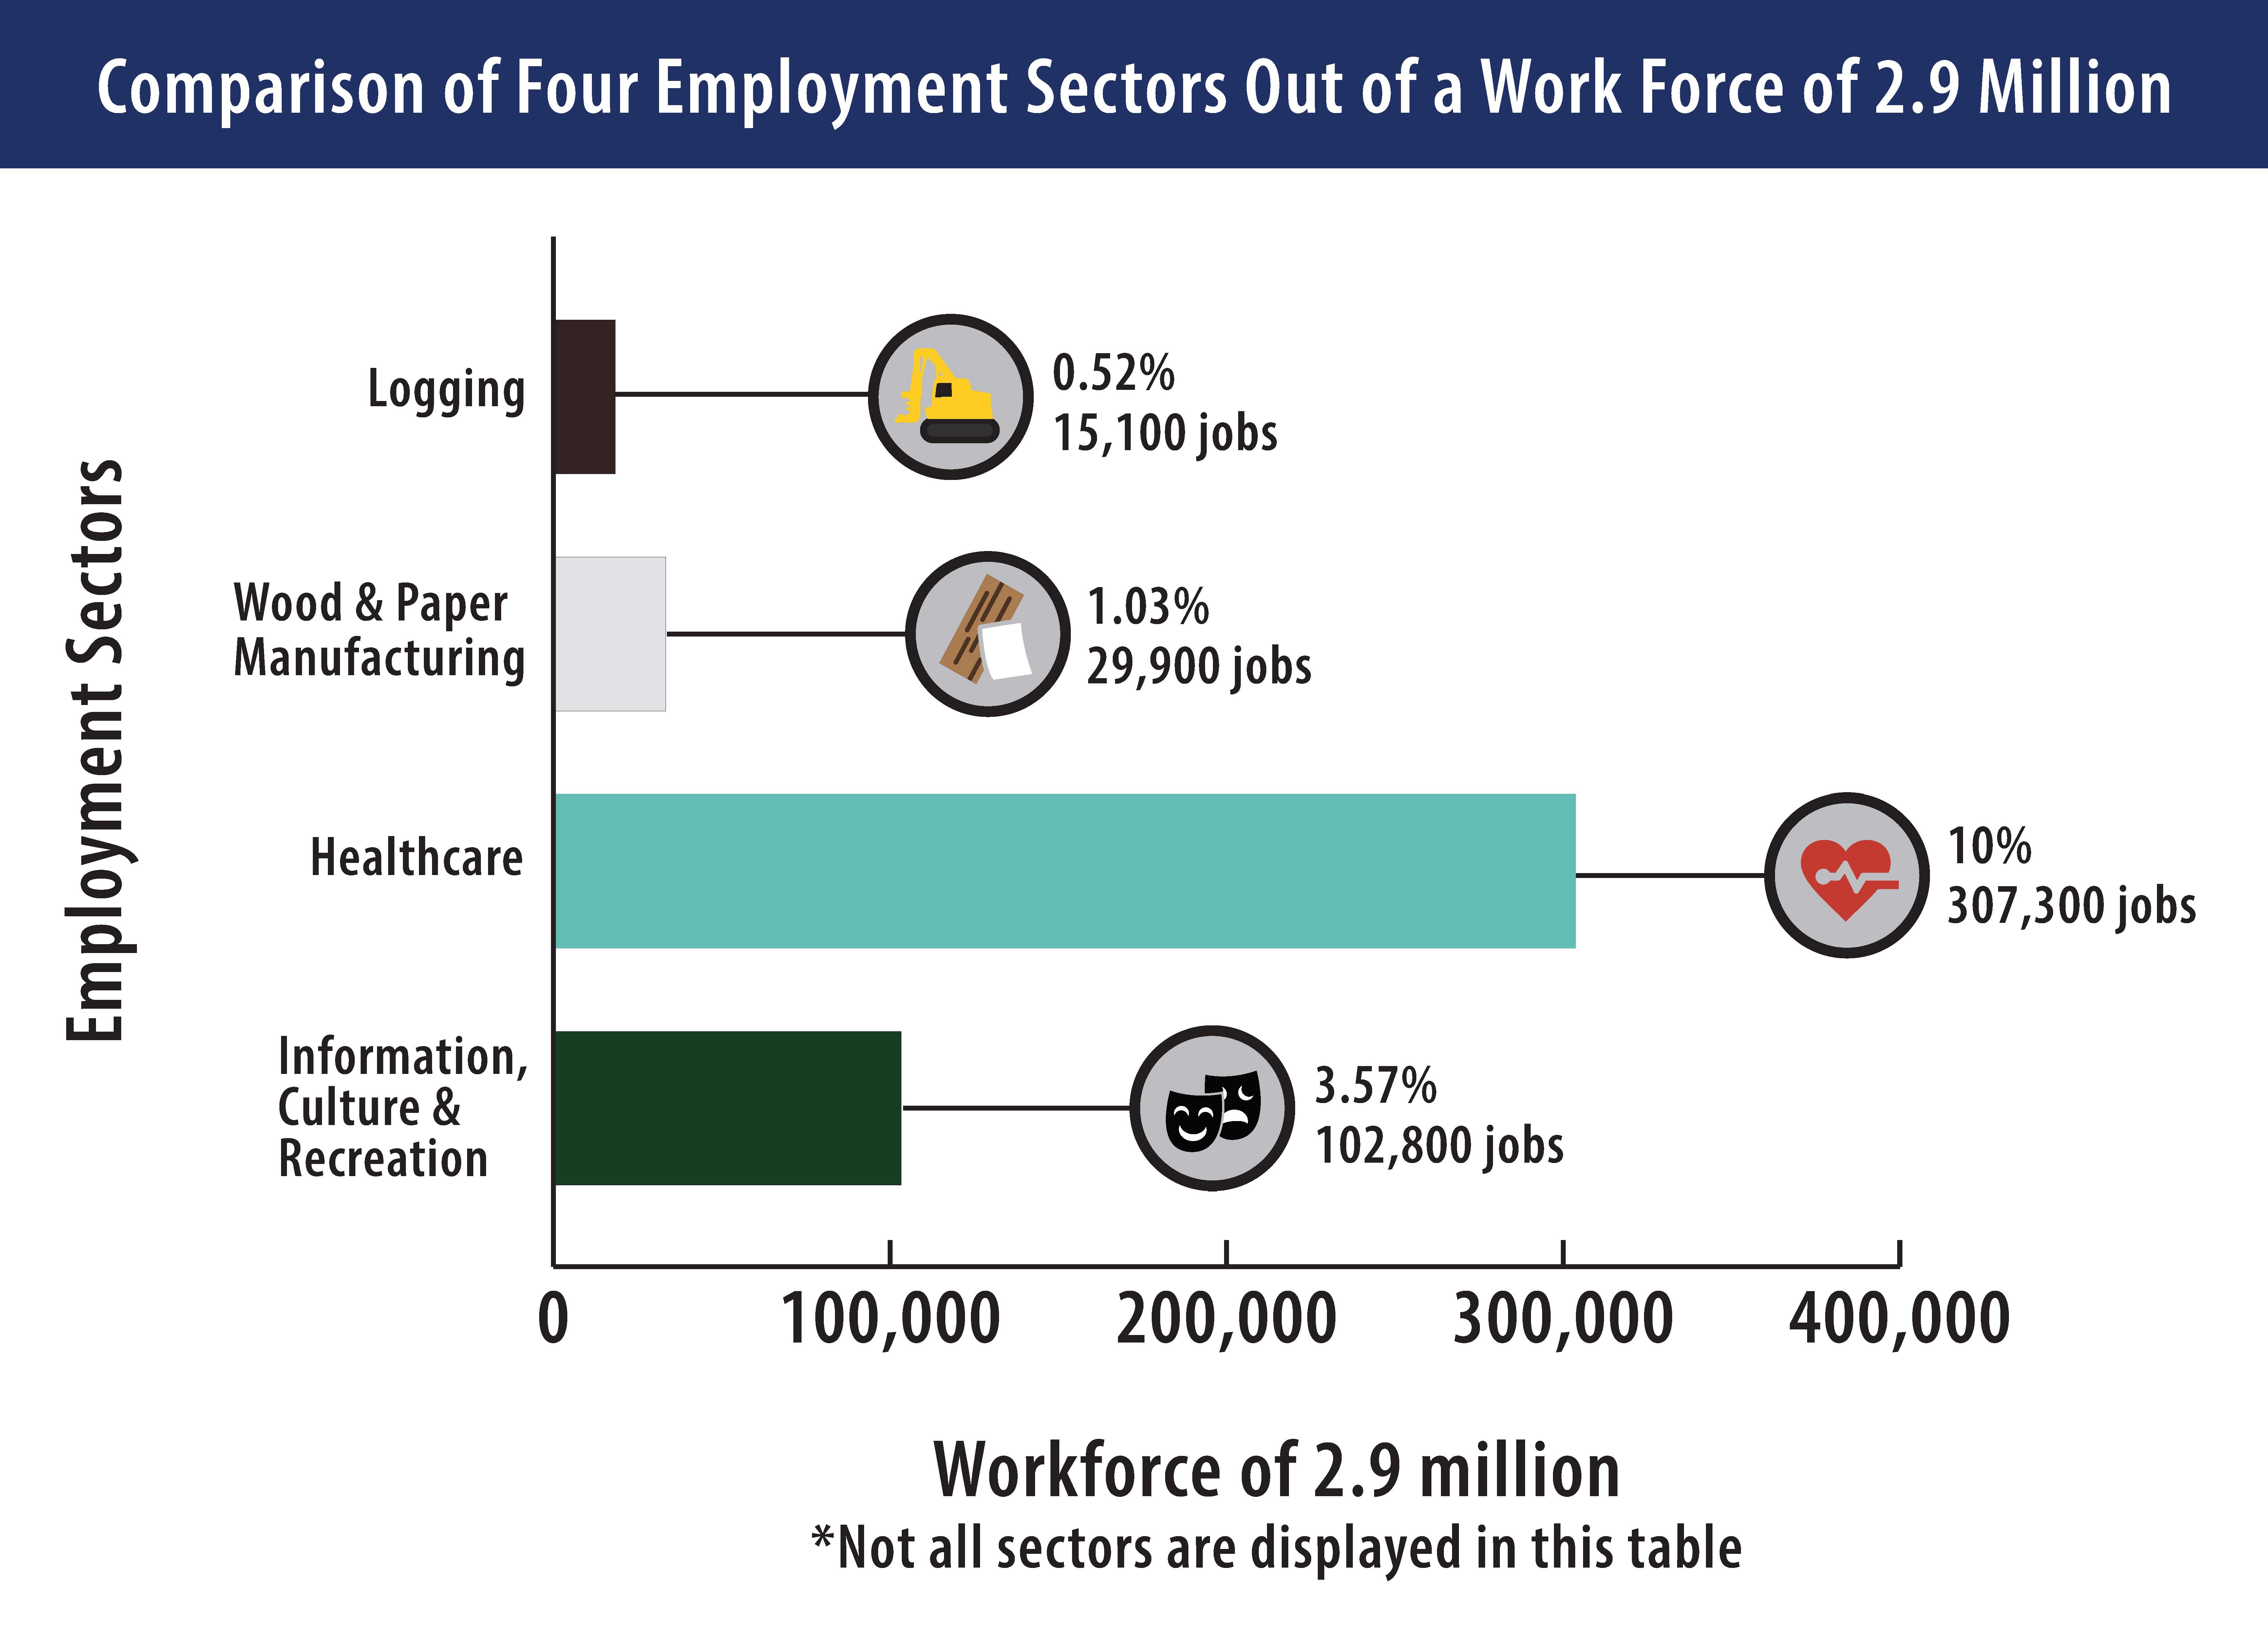 Comparison of four employment sectors out of work force of 2.9 million